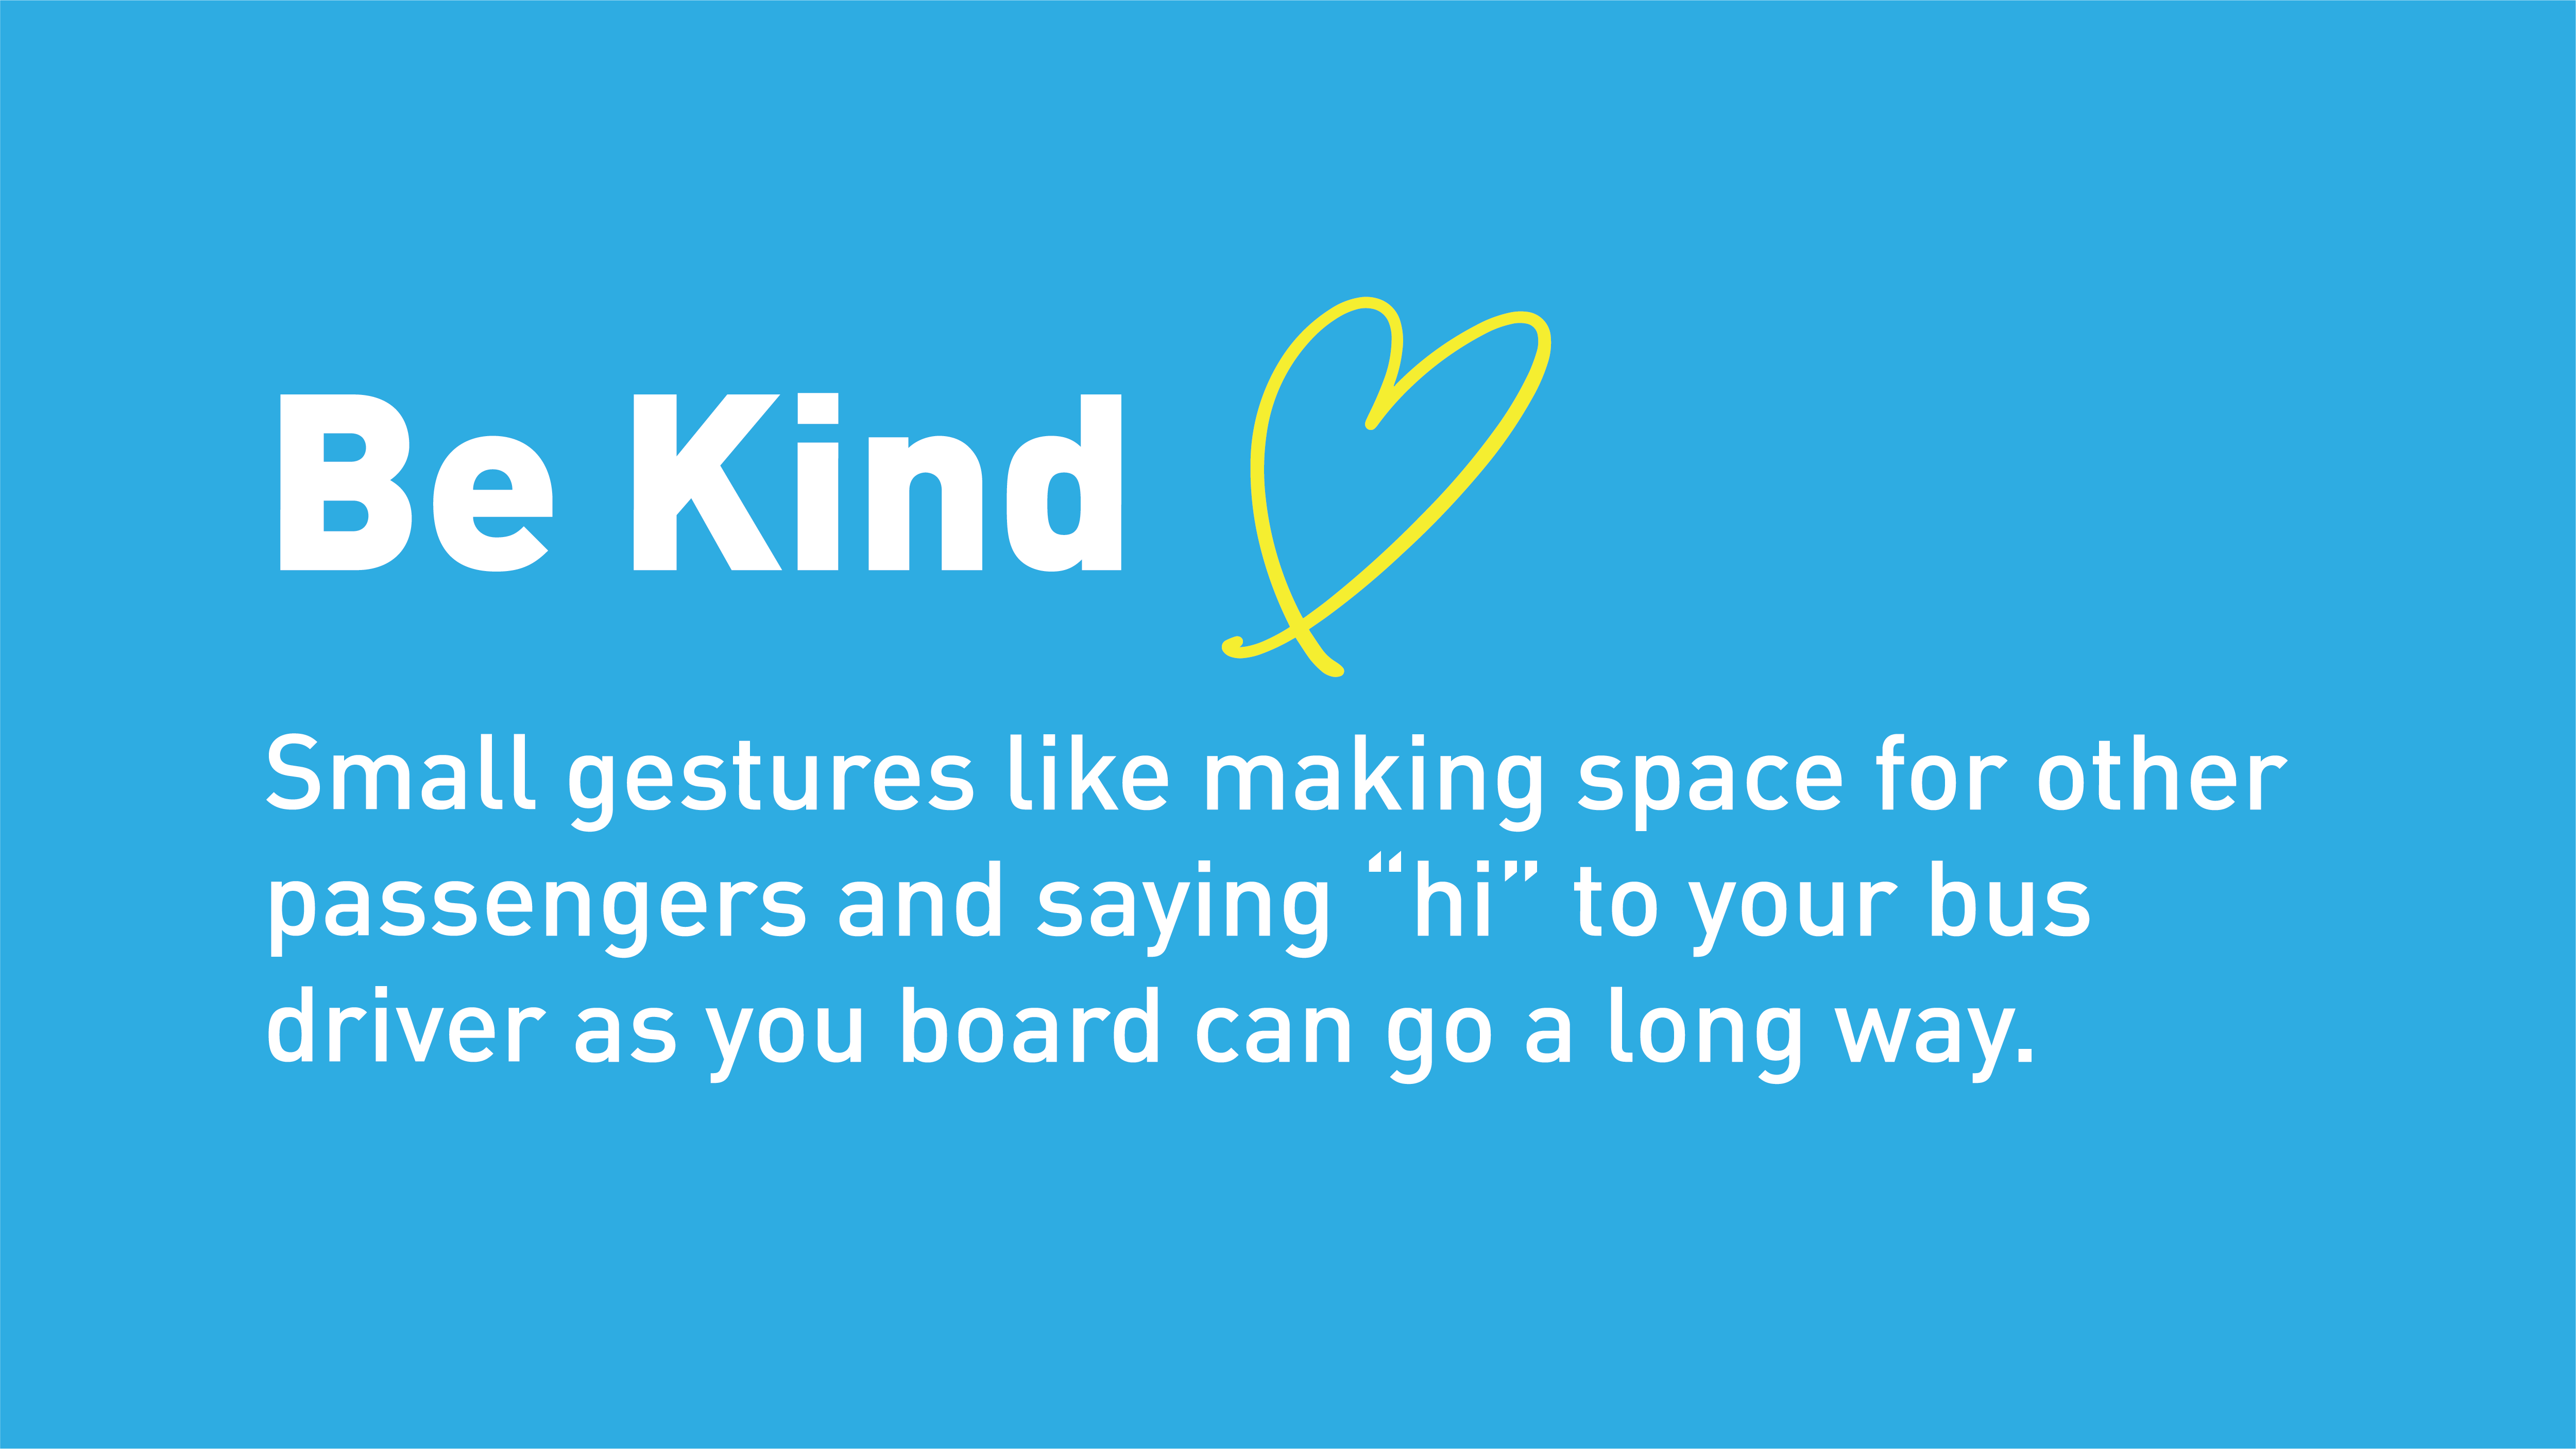 Be Kind. Make space for other passengers or say hi to your bus driver